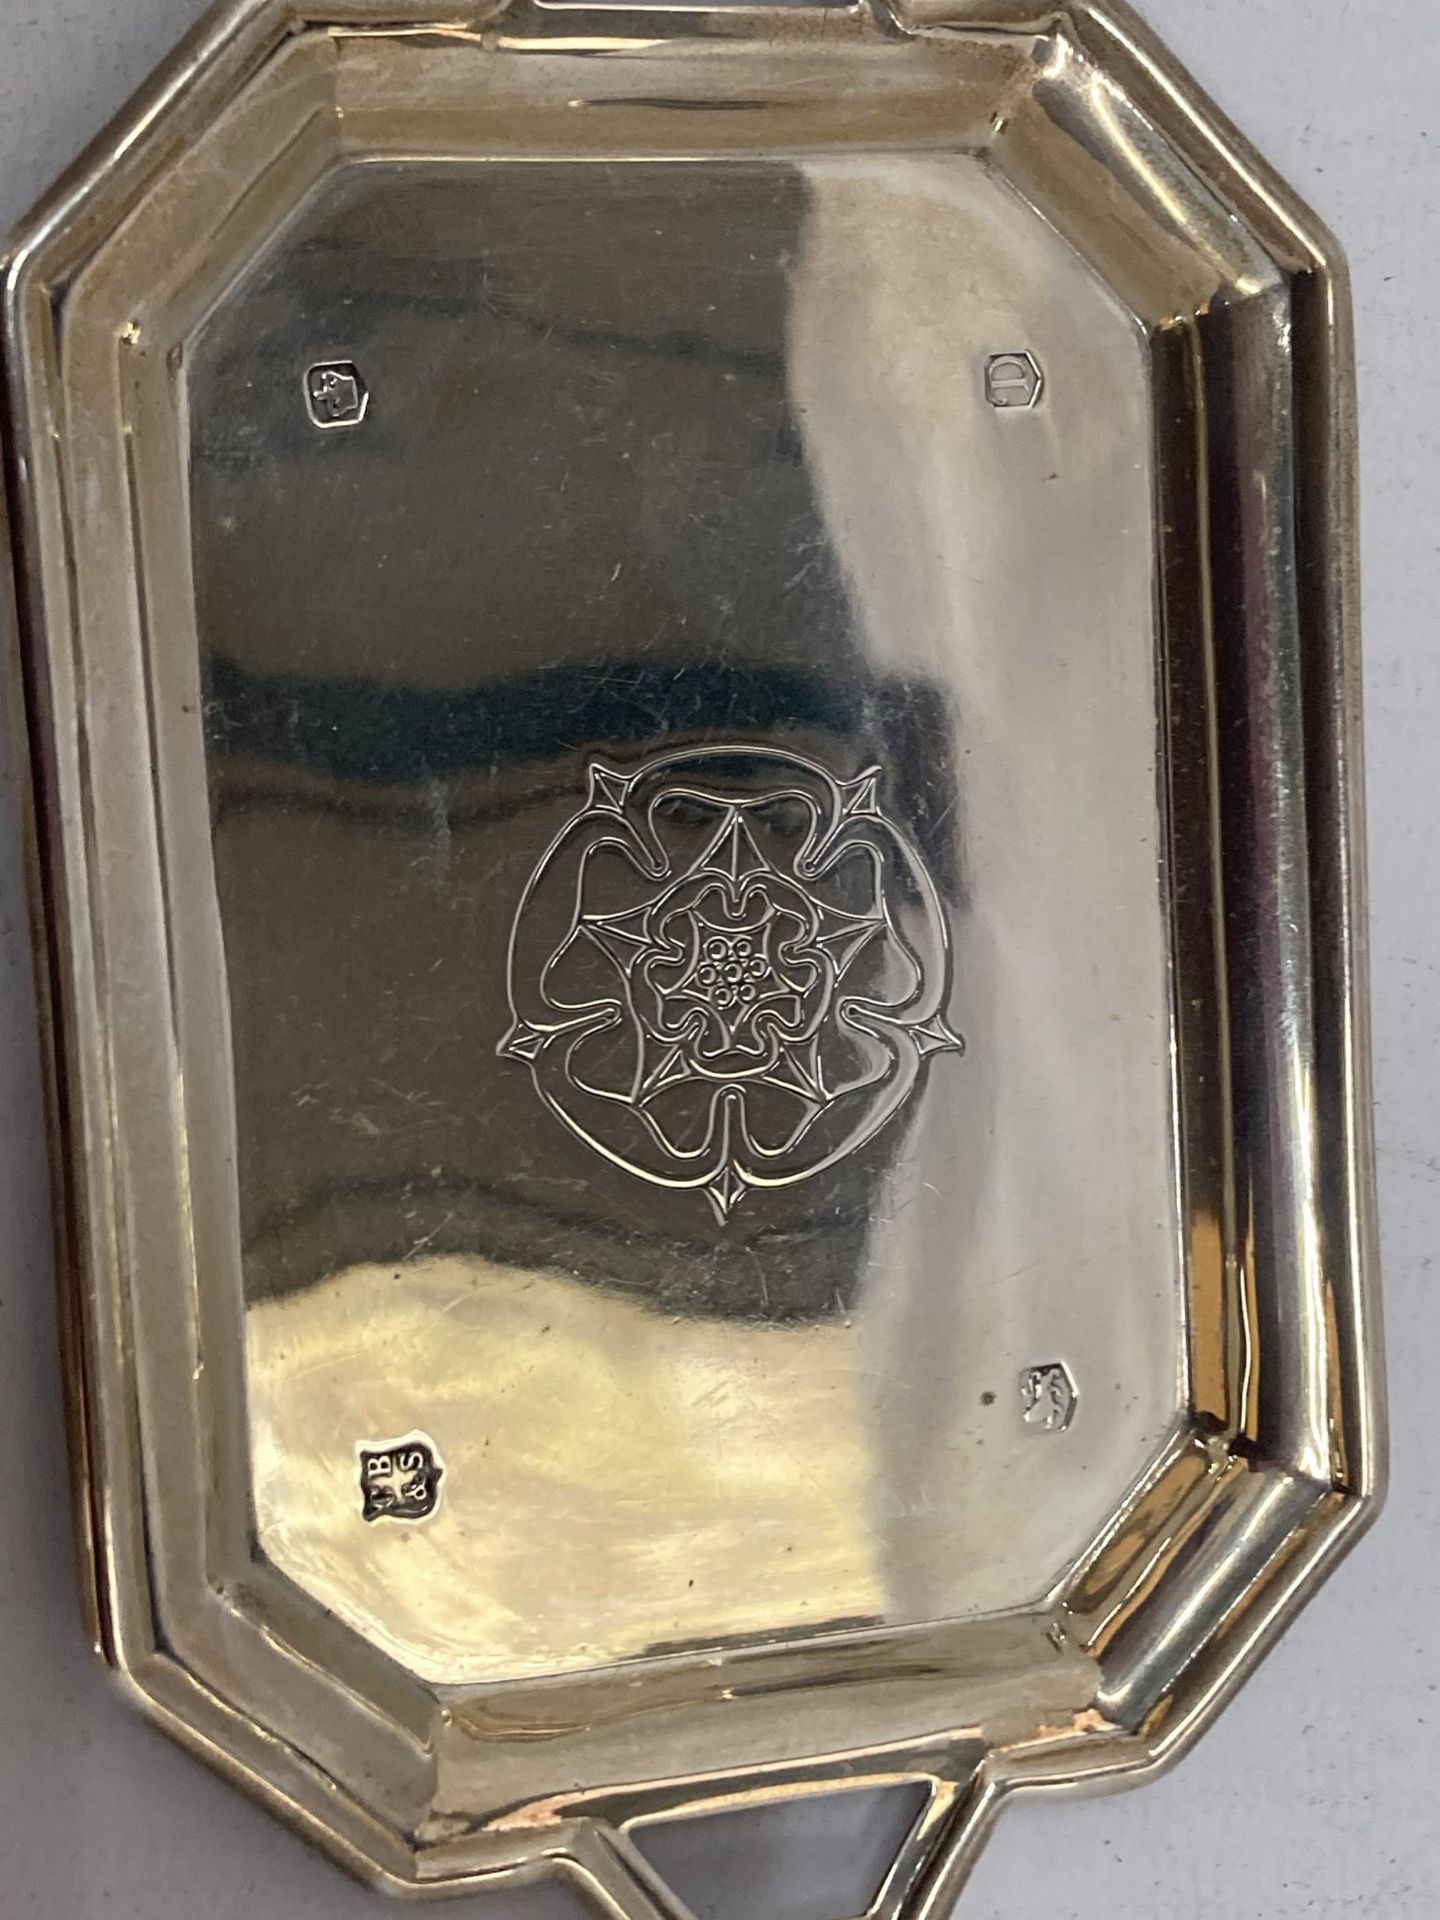 A SHEFFIELD HALLMARKED SILVER SMALL TRAY WITH ROSE DESIGN, LENGTH 12.5CM, WEIGHT 49G - Image 2 of 3